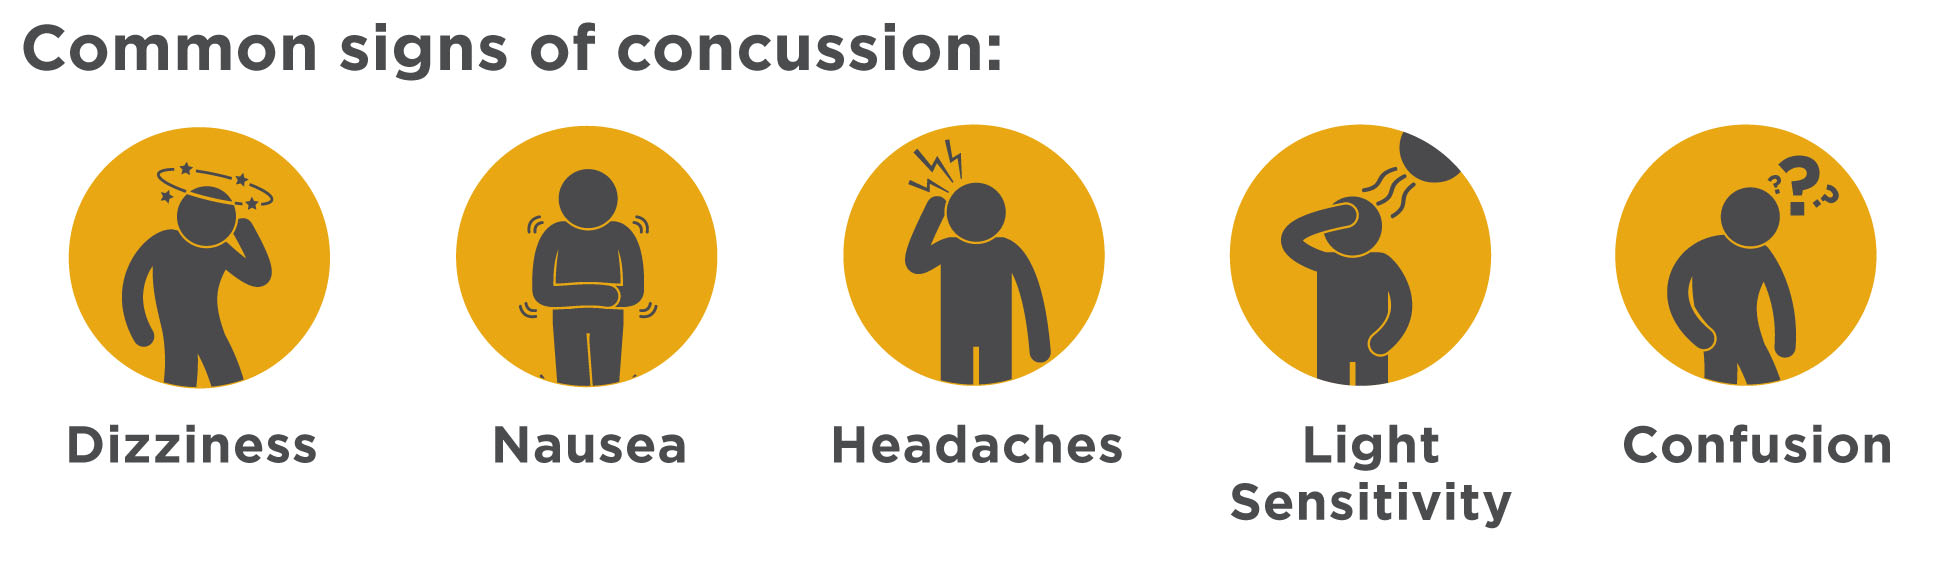 The signs of a concussion (dizziness, nausea, headaches, light sensitivity and confusion).